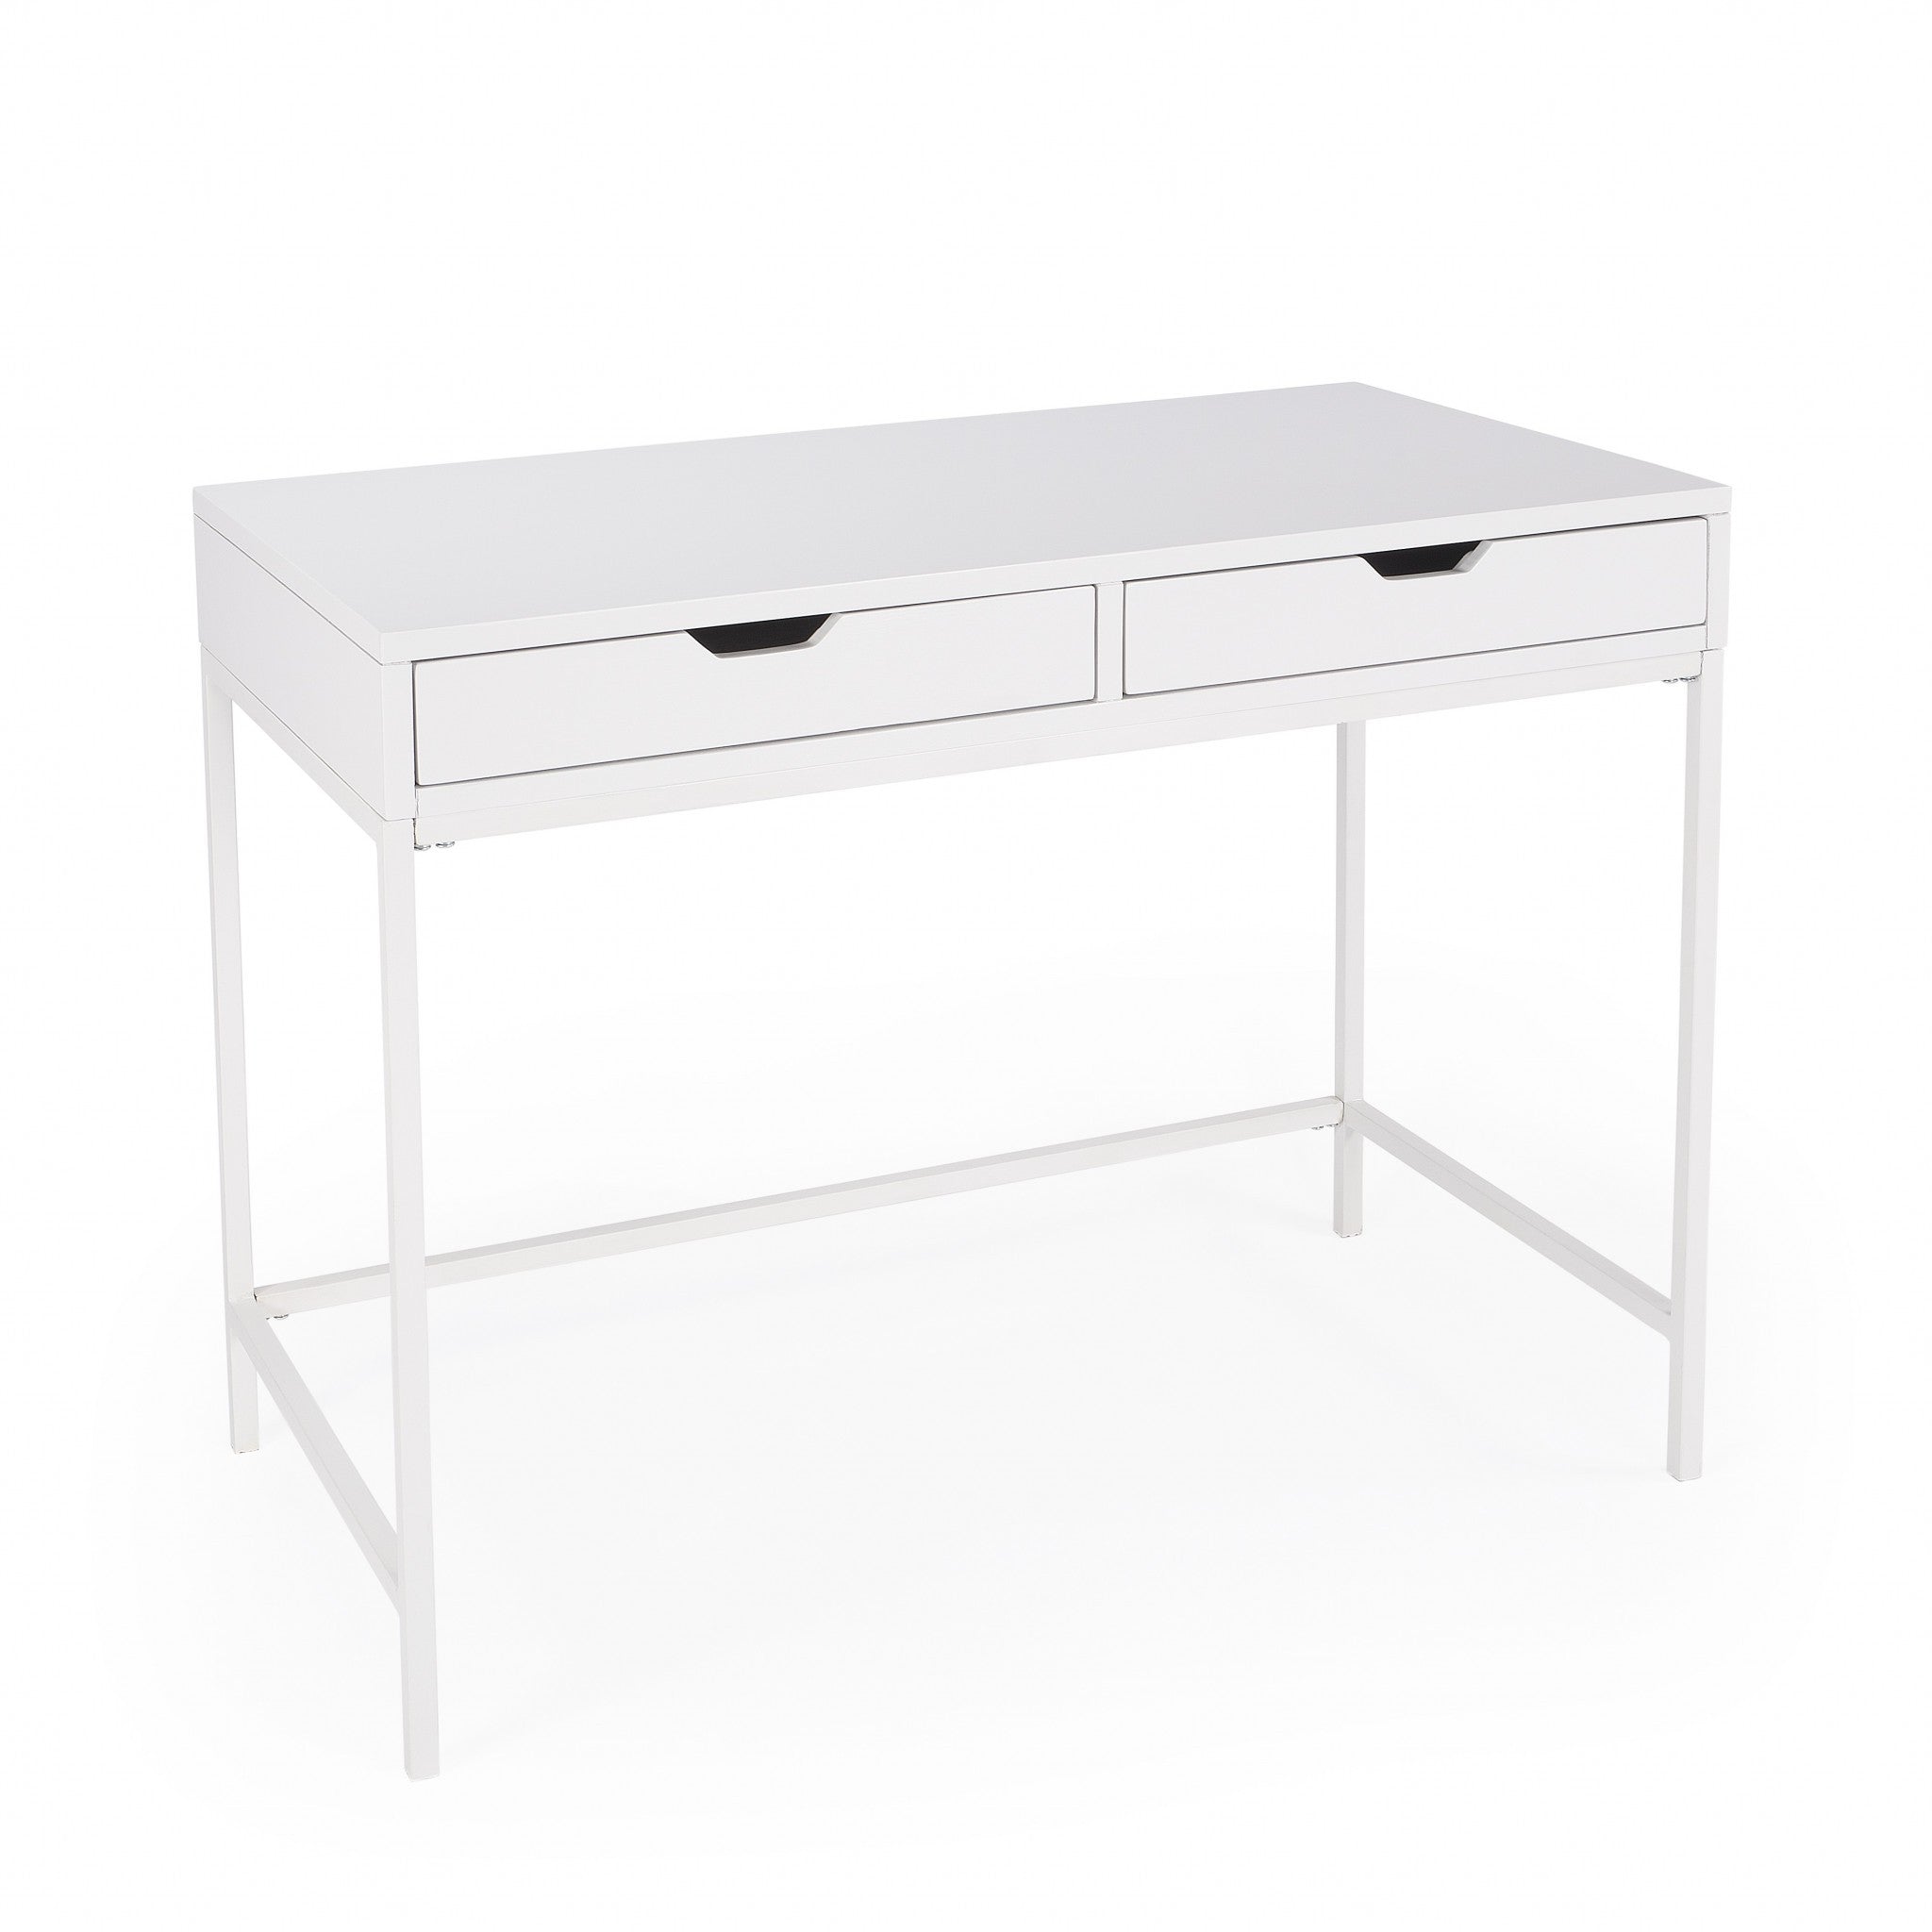 40" White Rubberwood Wood Writing Desk With Two Drawers